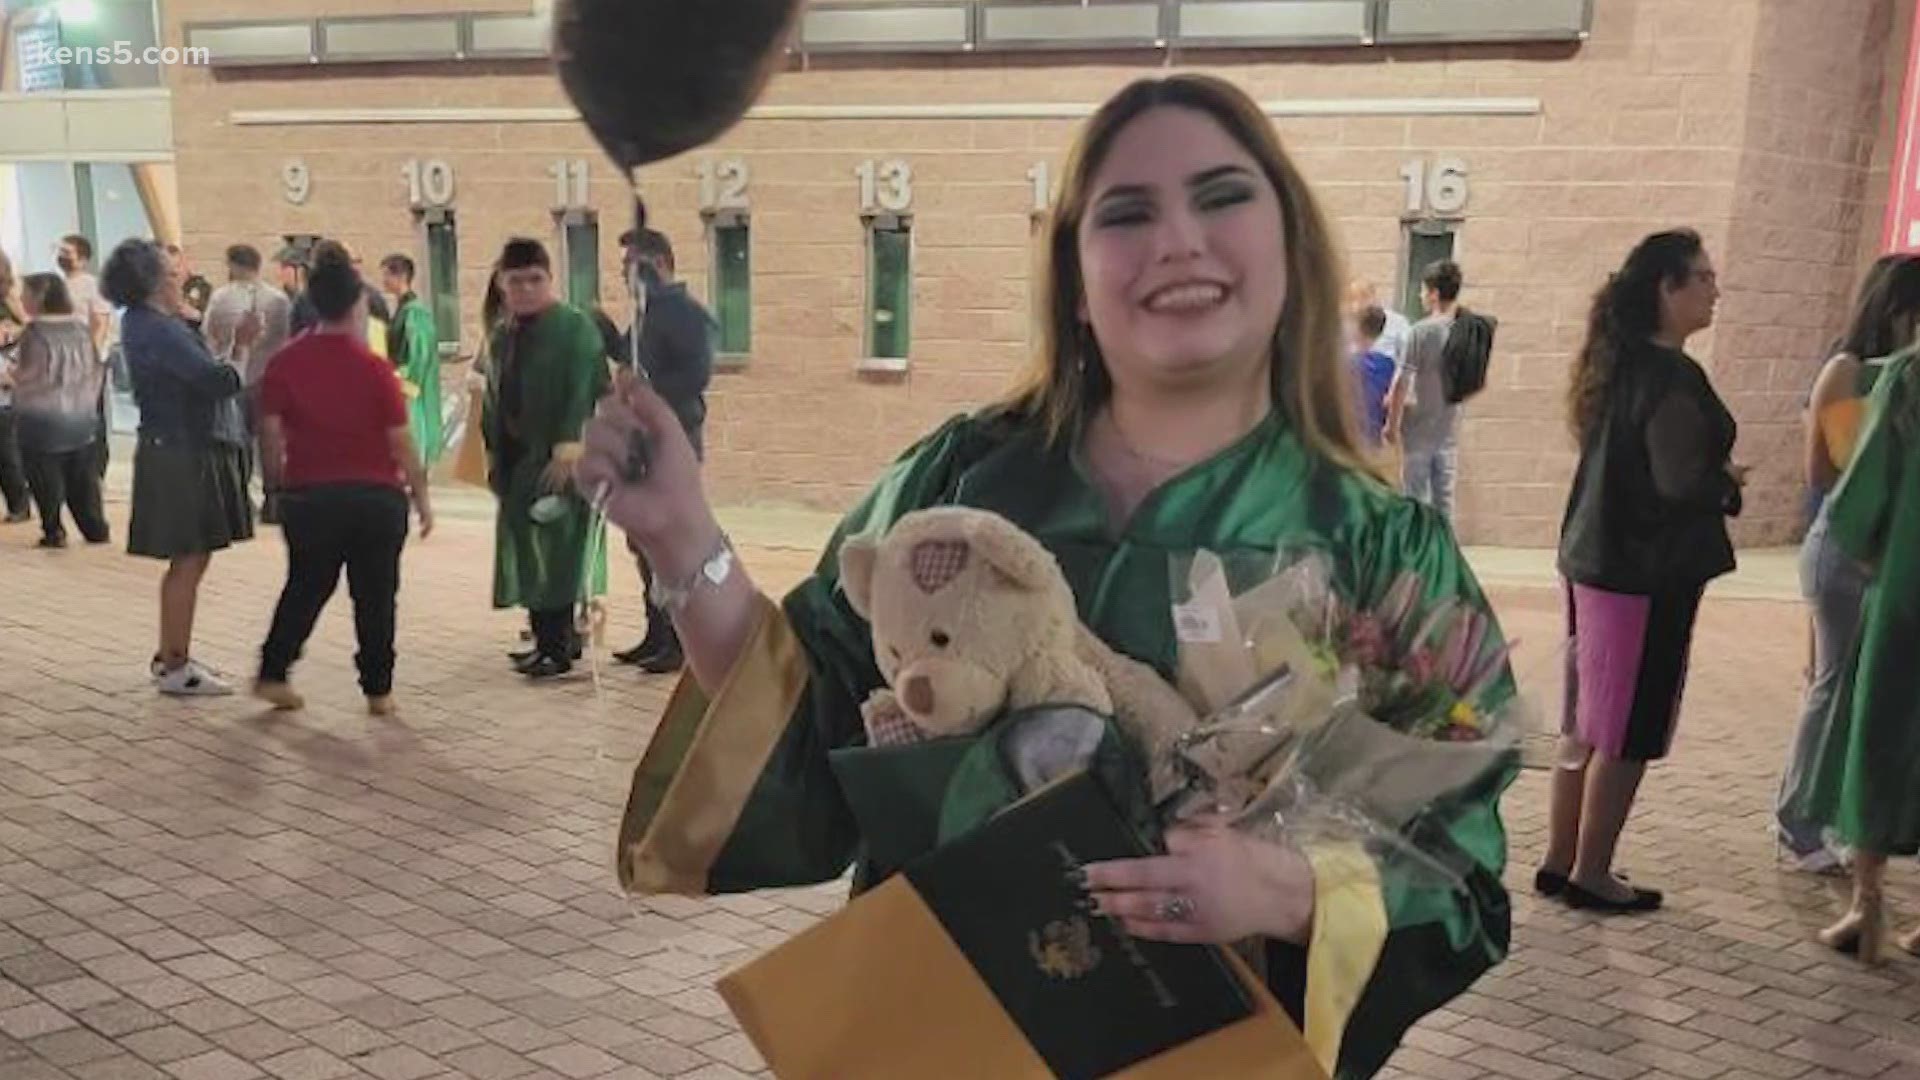 Adriah Rivera's father died in 2018 and she's carried a teddy bear with his ashes inside ever since. When she dropped it this week, she thought she lost it forever.